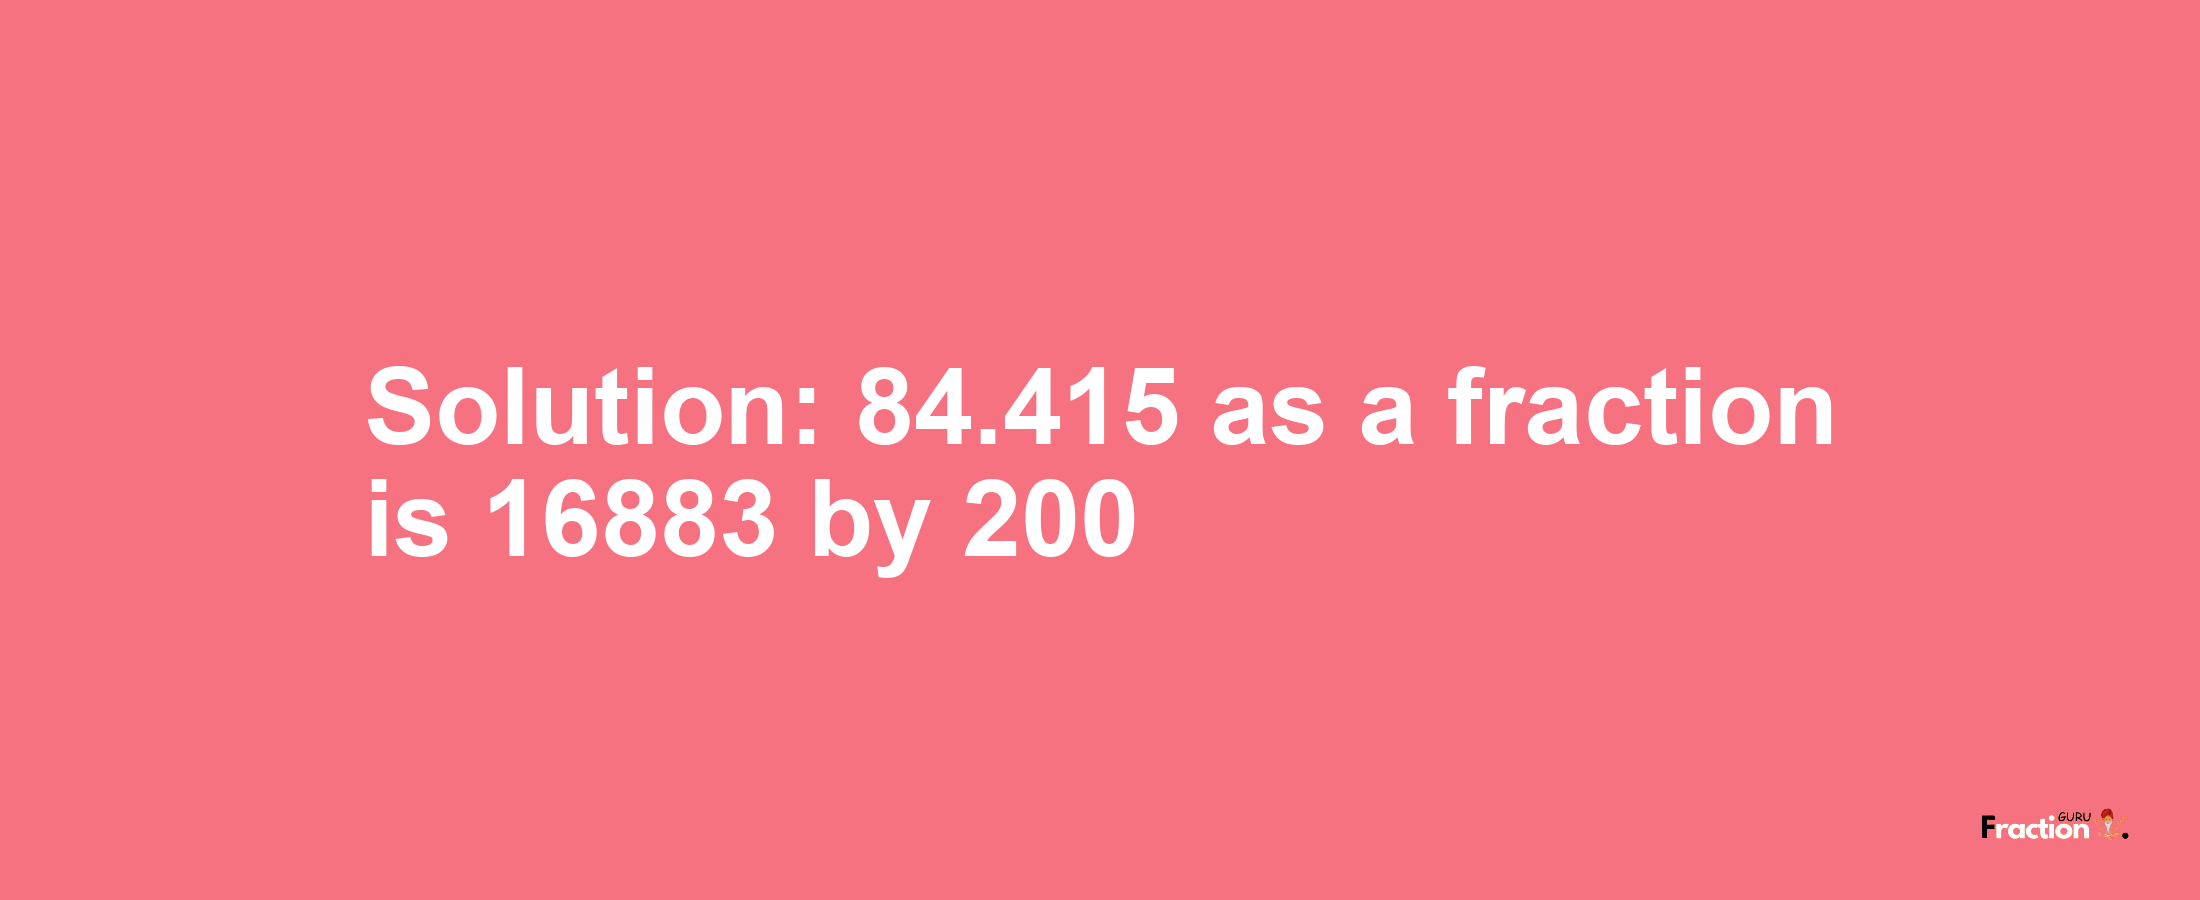 Solution:84.415 as a fraction is 16883/200